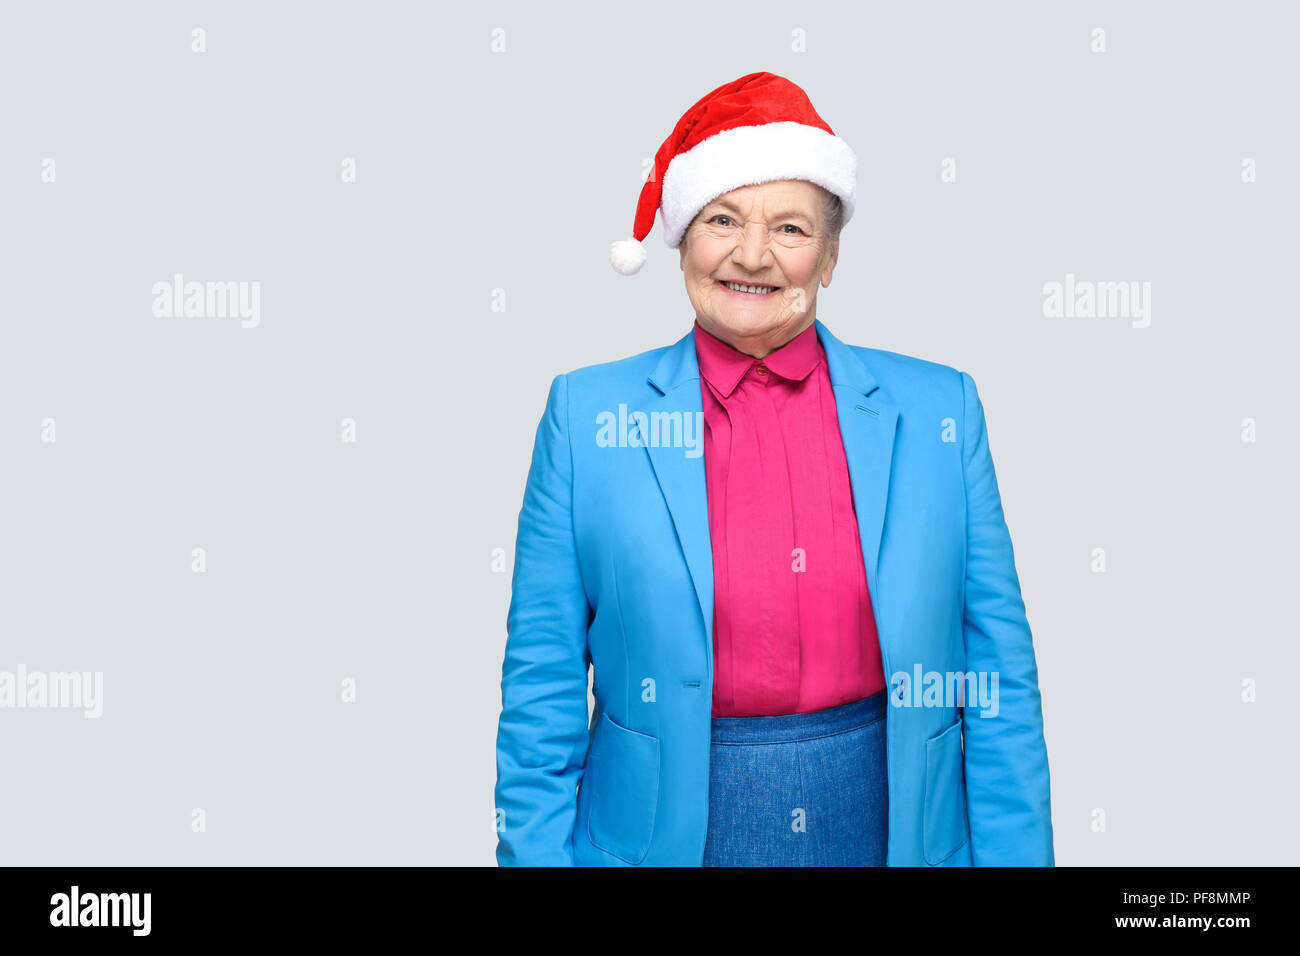 Satisfied toothy smiling colorful casual style aged woman with blue suit and christmas santa red cap standing and looking at camera with joyful face.  Stock Photo